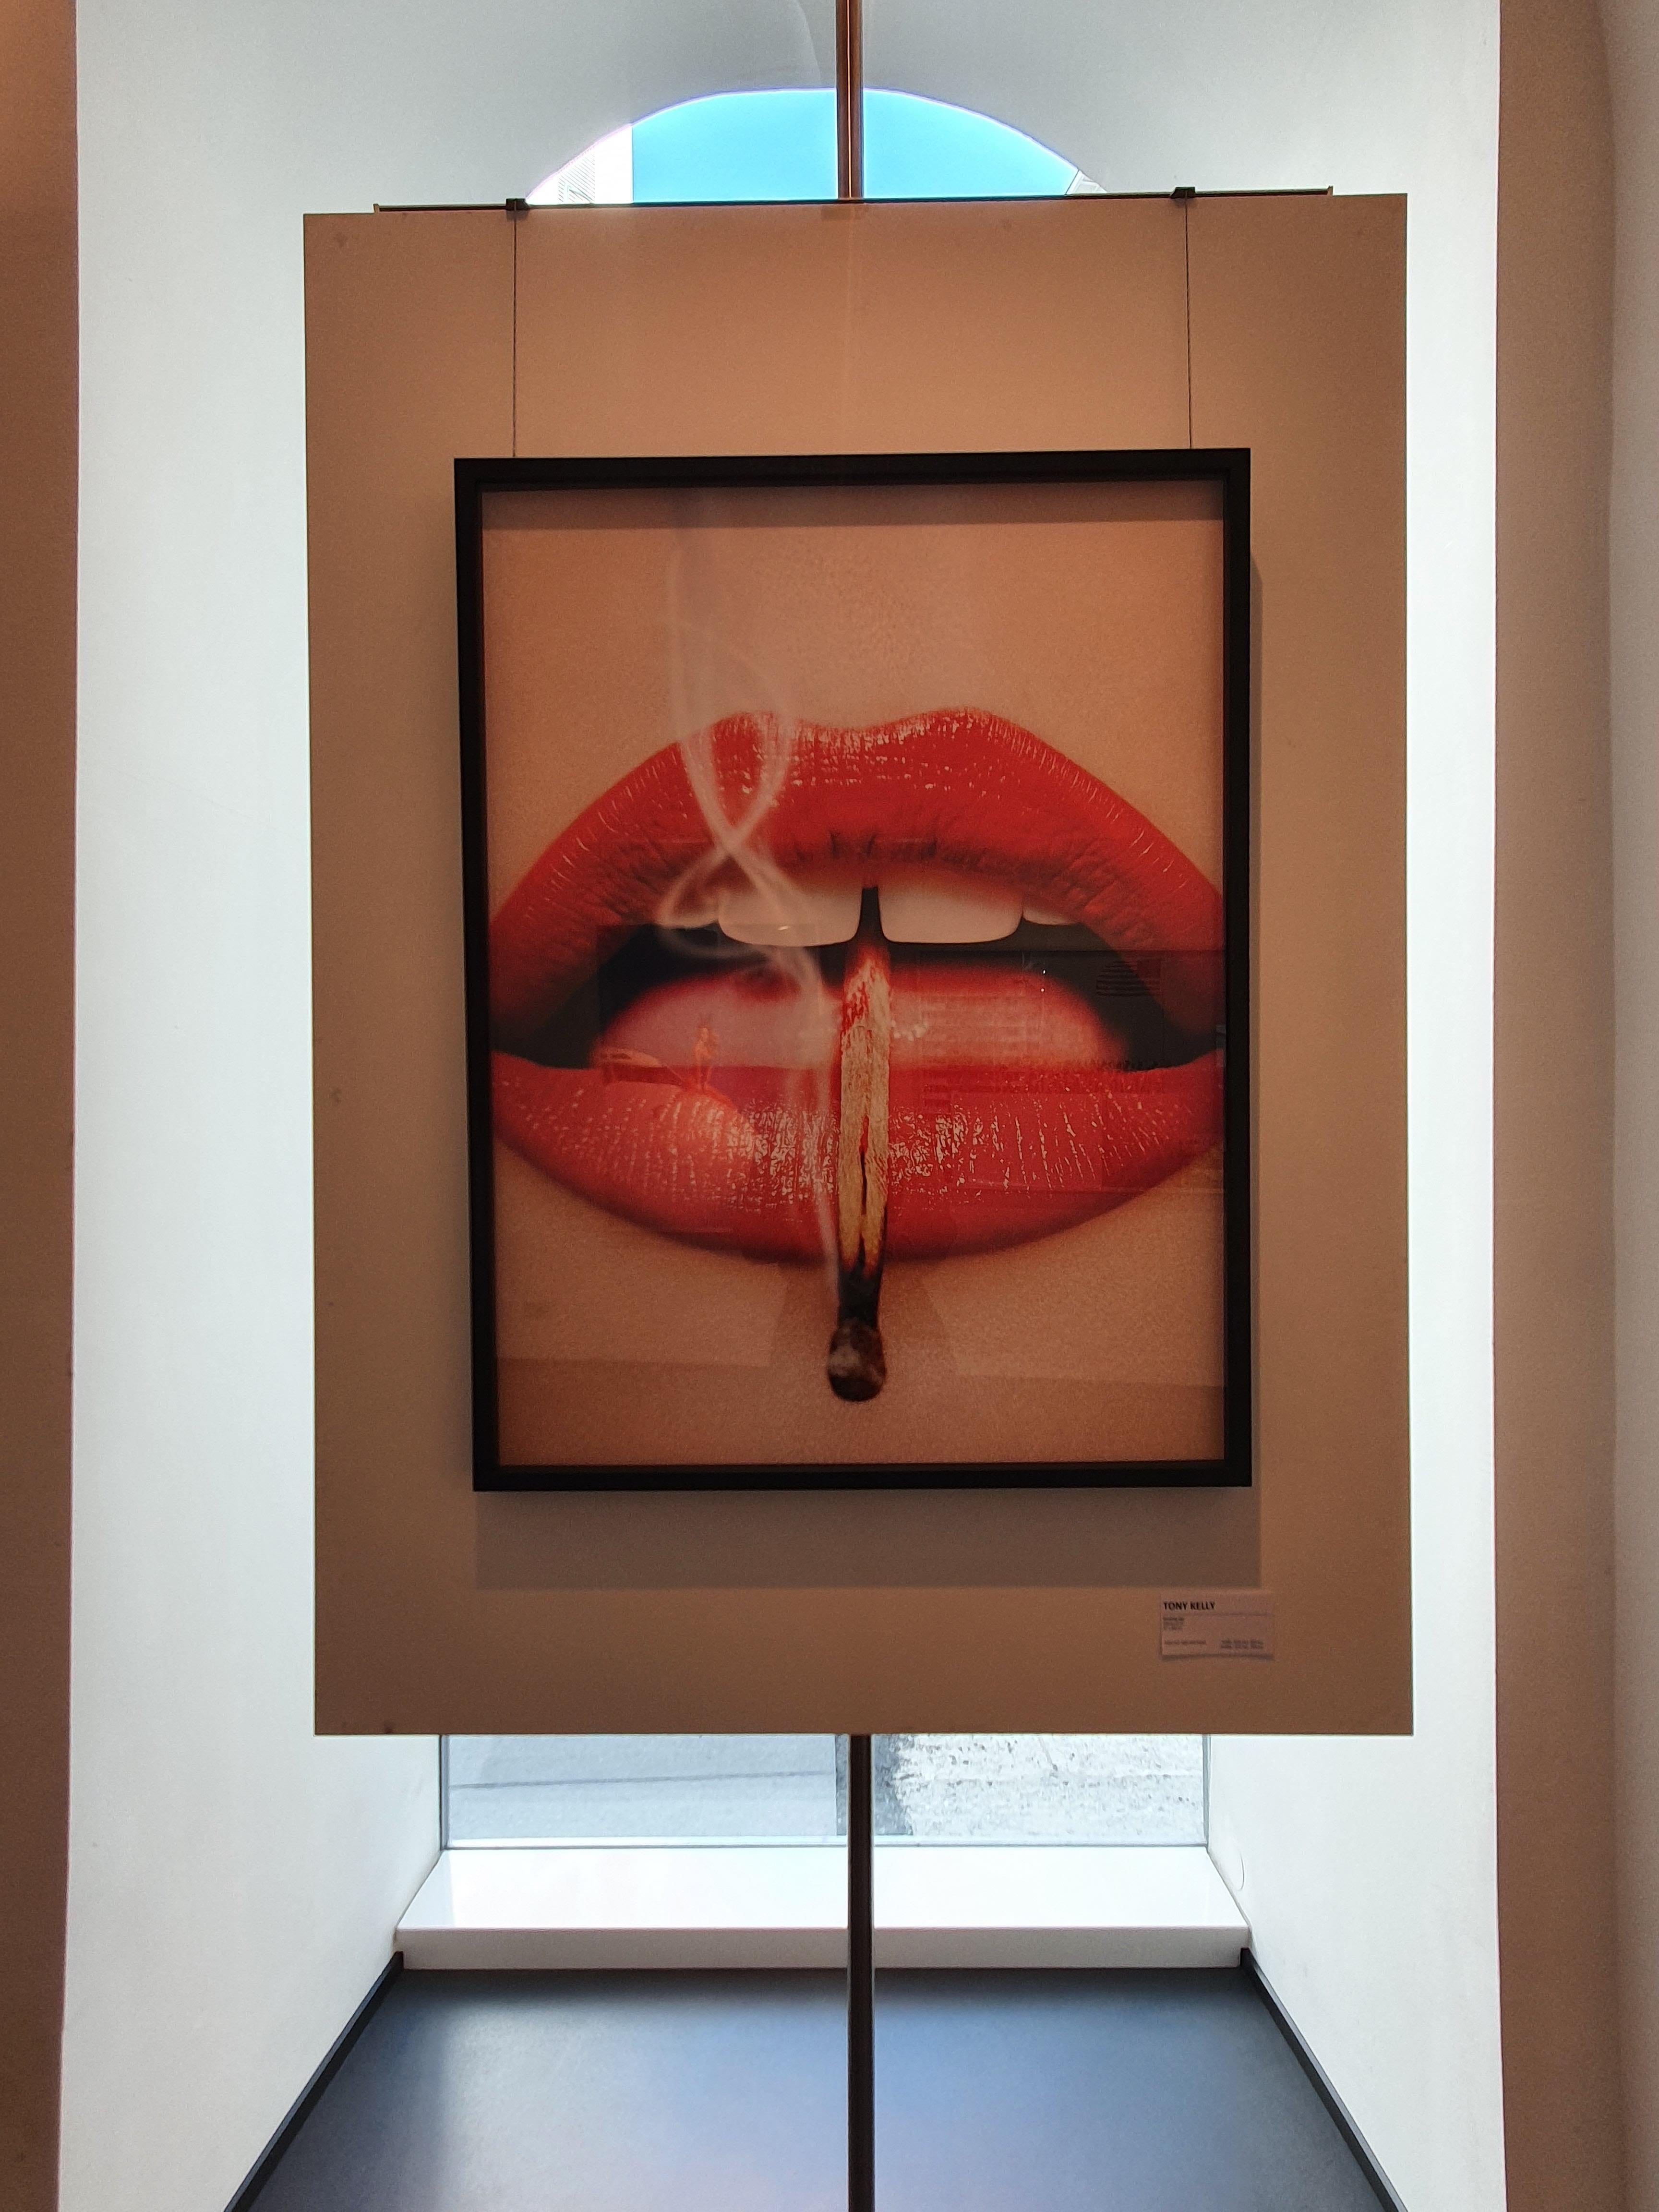 Smoking Lips - 2013 Playboy Cover of Red Lips with a Burning Match, fine art - Contemporary Photograph by Tony Kelly